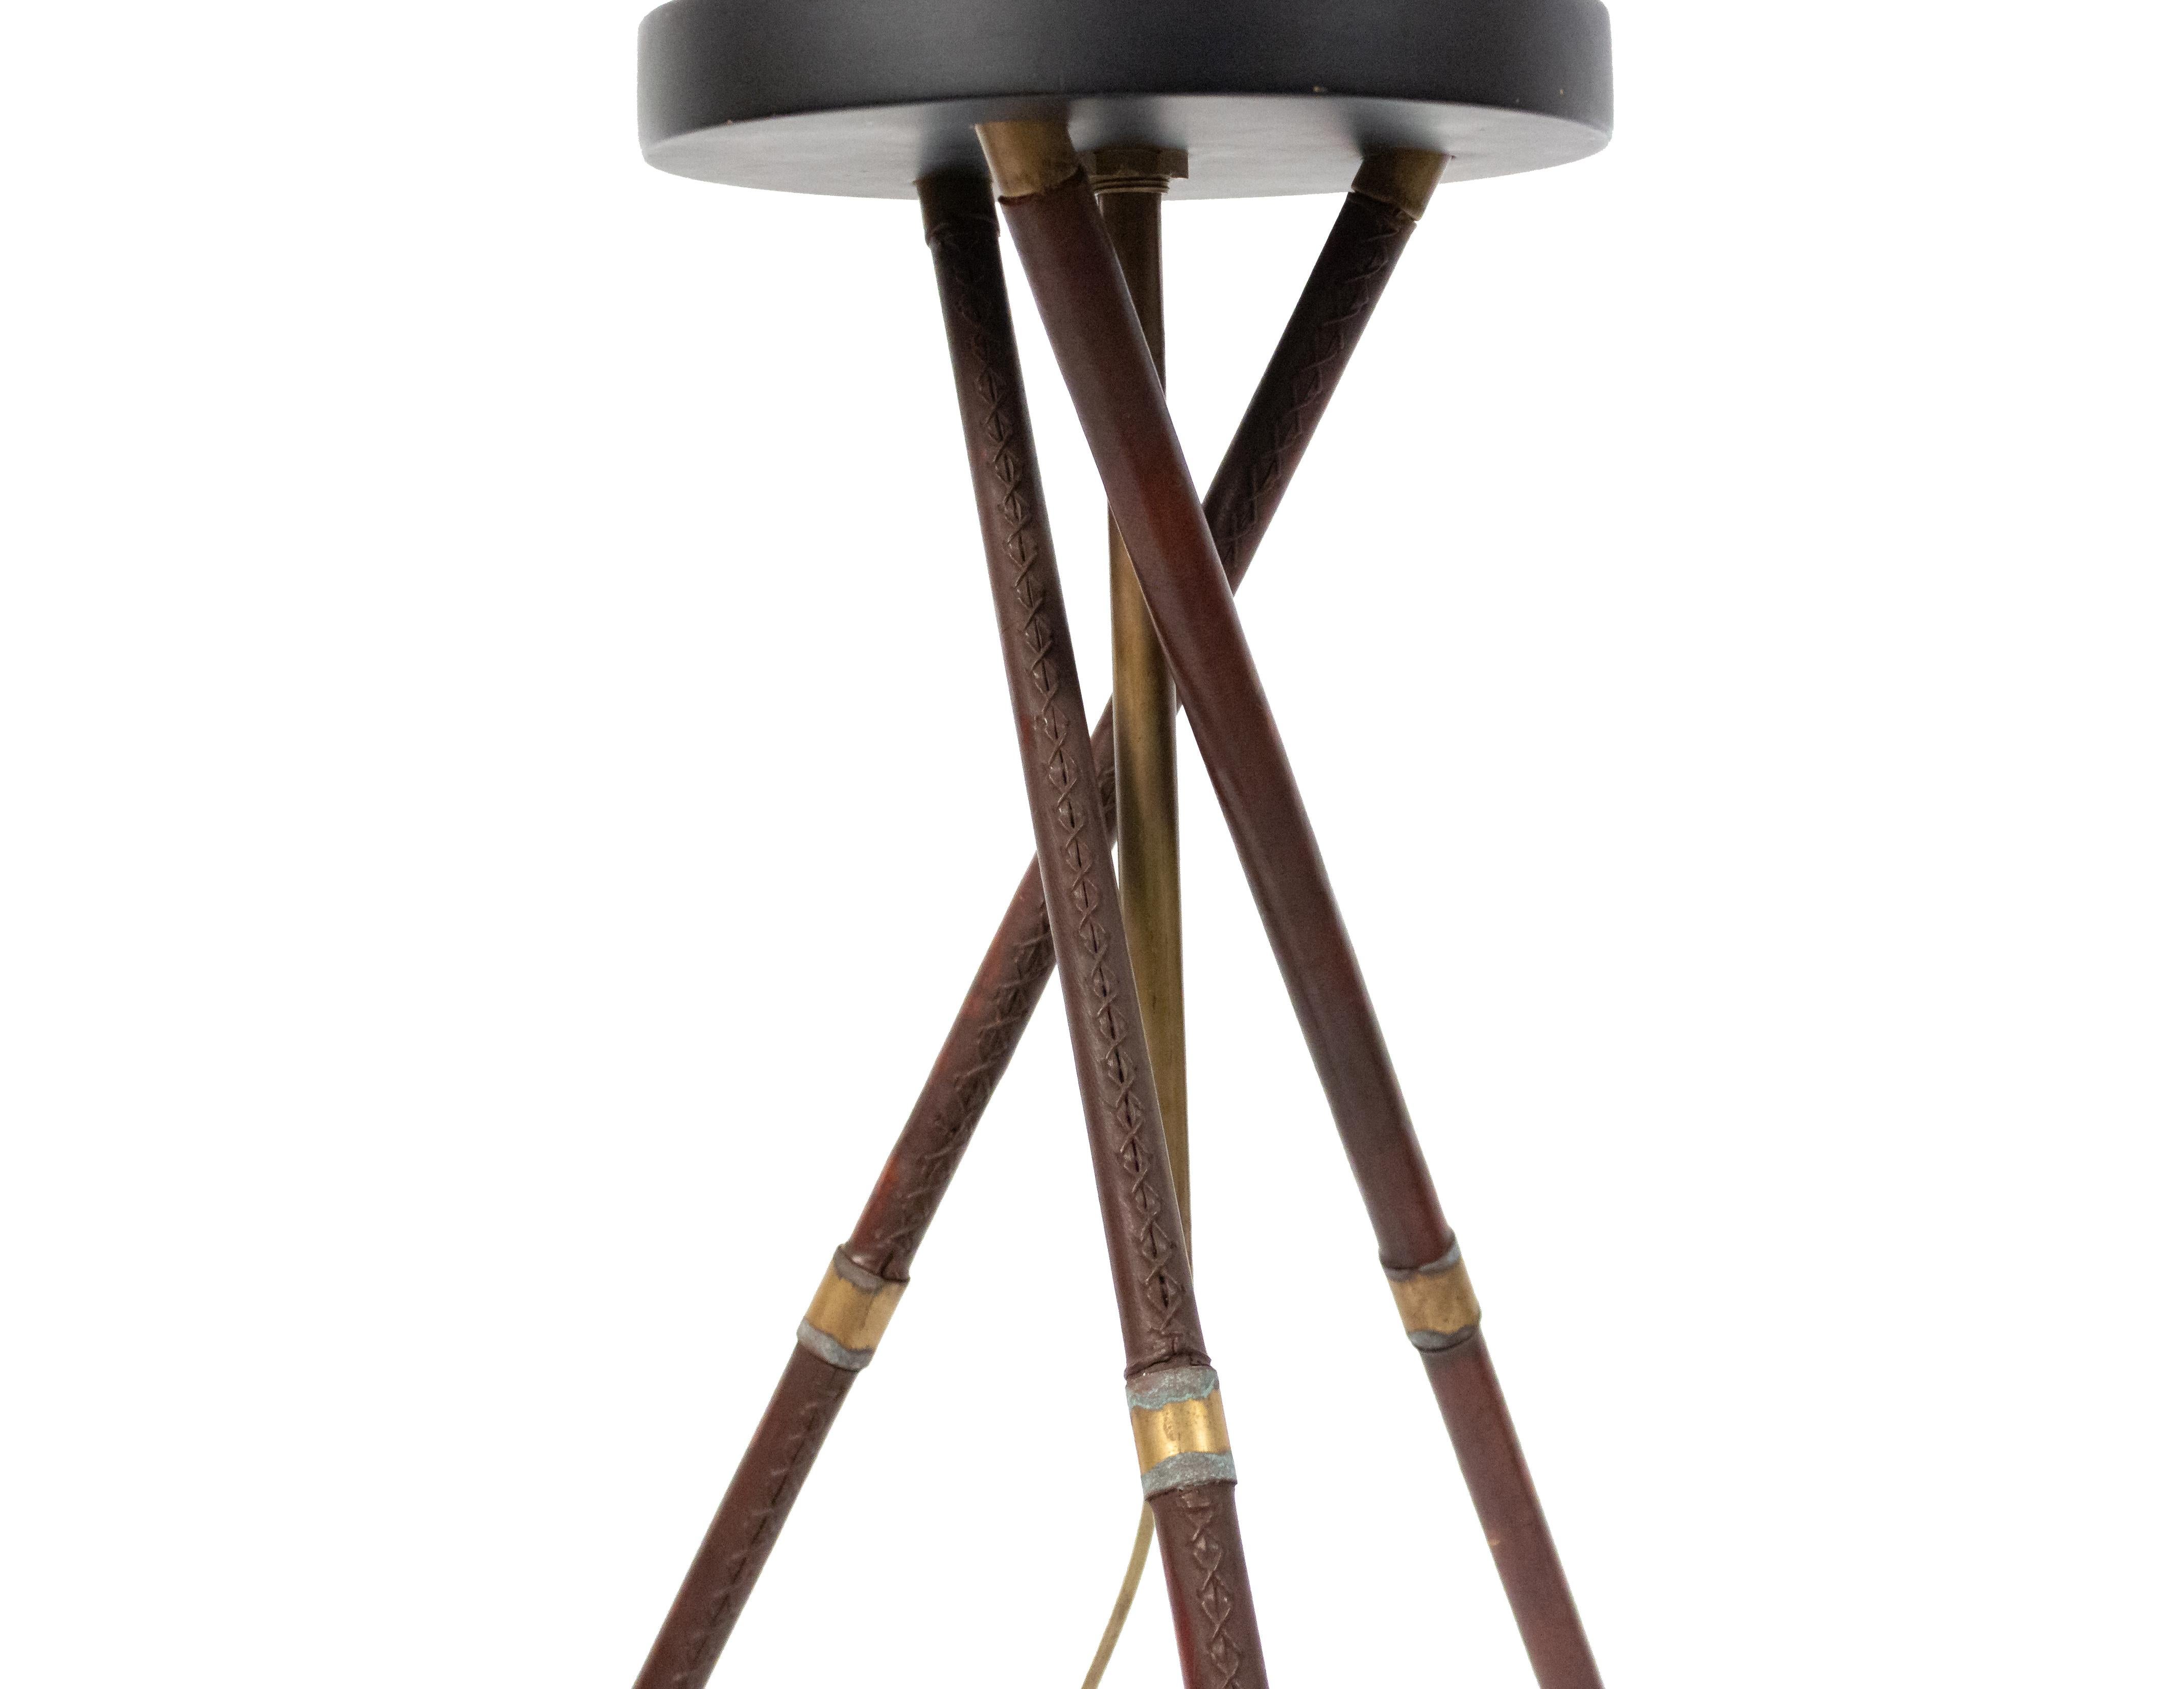 Midcentury French novelty metal golf club floor lamp with leather wrapped base. Attributed to Jacques Adnet, circa 1945.